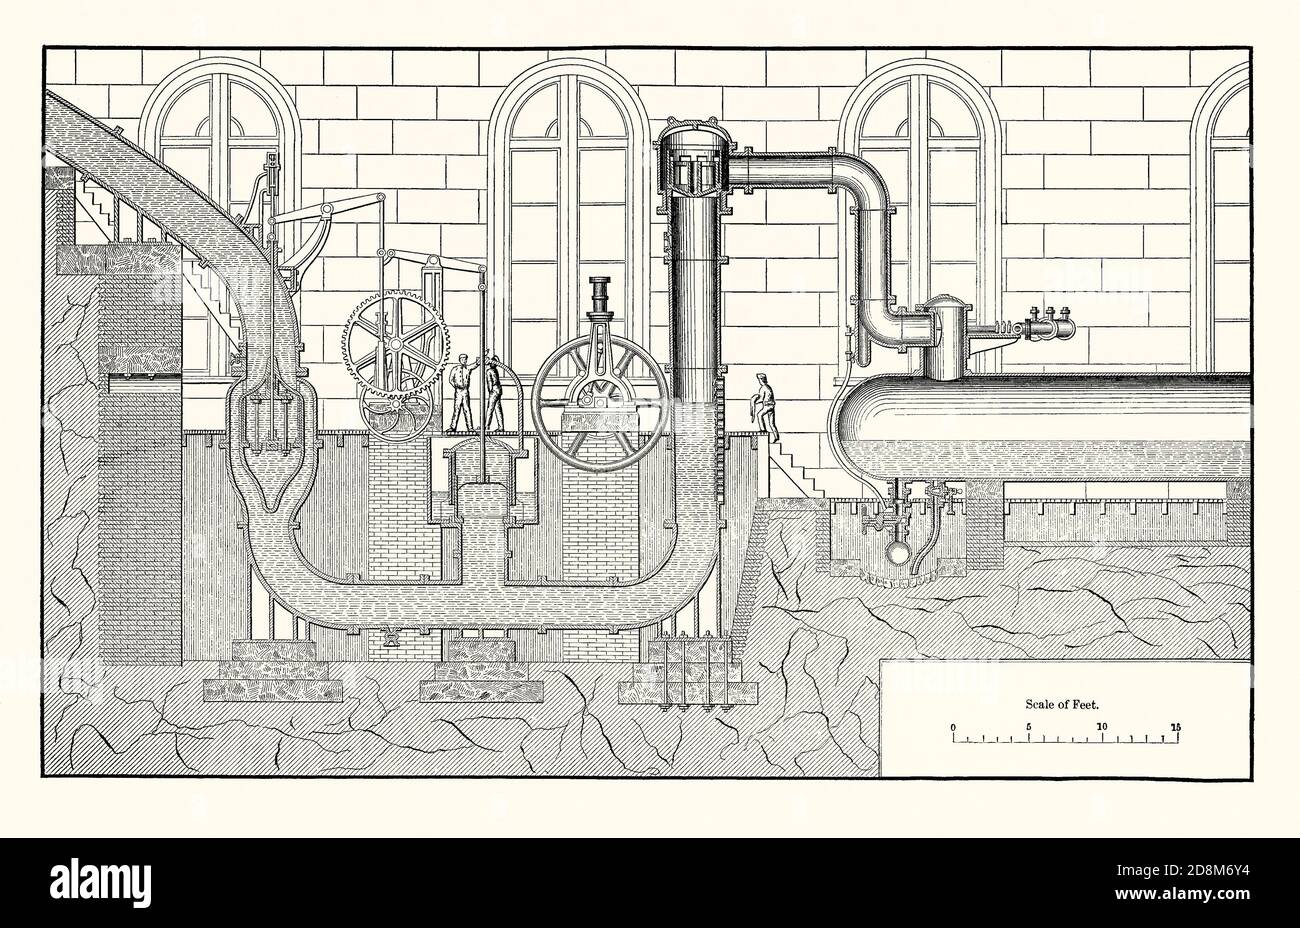 An old engraving showing a giant air compressor used in the Mount Cenis Tunnel or Fréjus Rail Tunnel in the 1860s. It is from a Victorian book of the 1880s. Frenchman Germain Sommeiller (or Sommeilleur – 1815–1871) invented and engineered the compressors at the Italian end of the tunnel. It used the force of gravity with water entering the system (left) to drive air into the cylinder (right) where a constant pressure could be maintained via a hydraulic head. Ten compressors were needed to supply air to the workforce within the tunnel. The tunnel was constructed in14 years, opening in 1871. Stock Photo